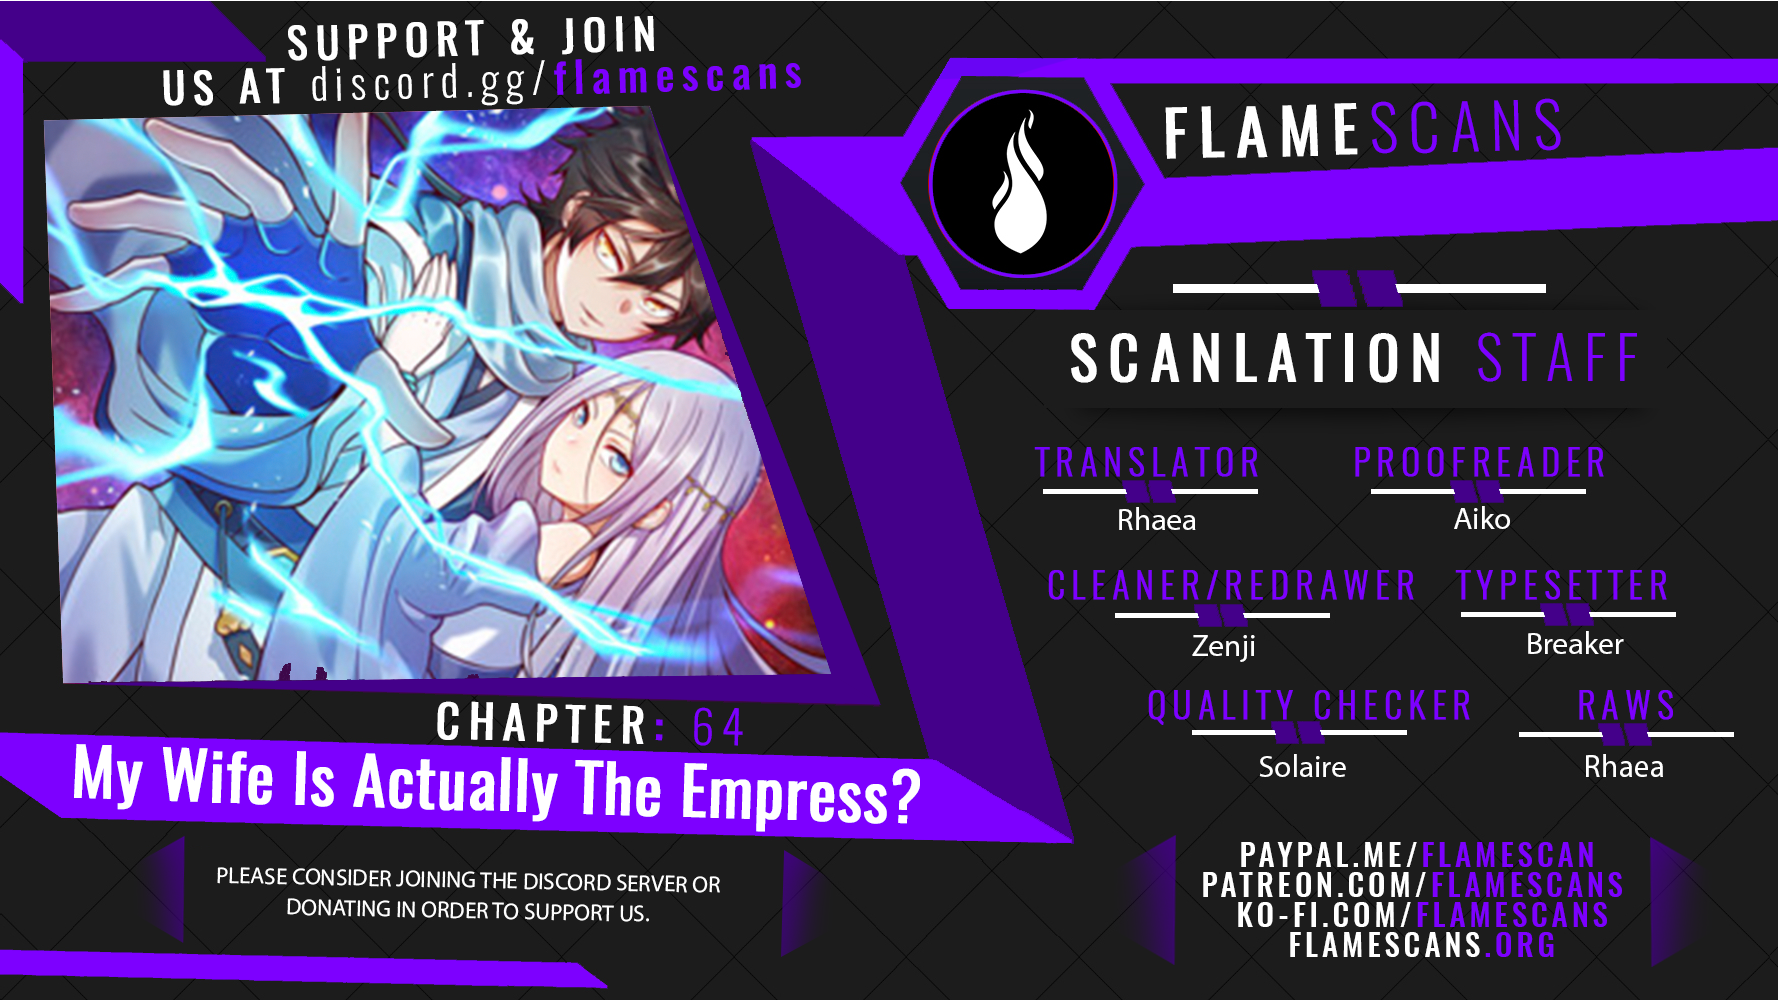 My Wife Is Actually The Empress? - Chapter 14174 - Image 1